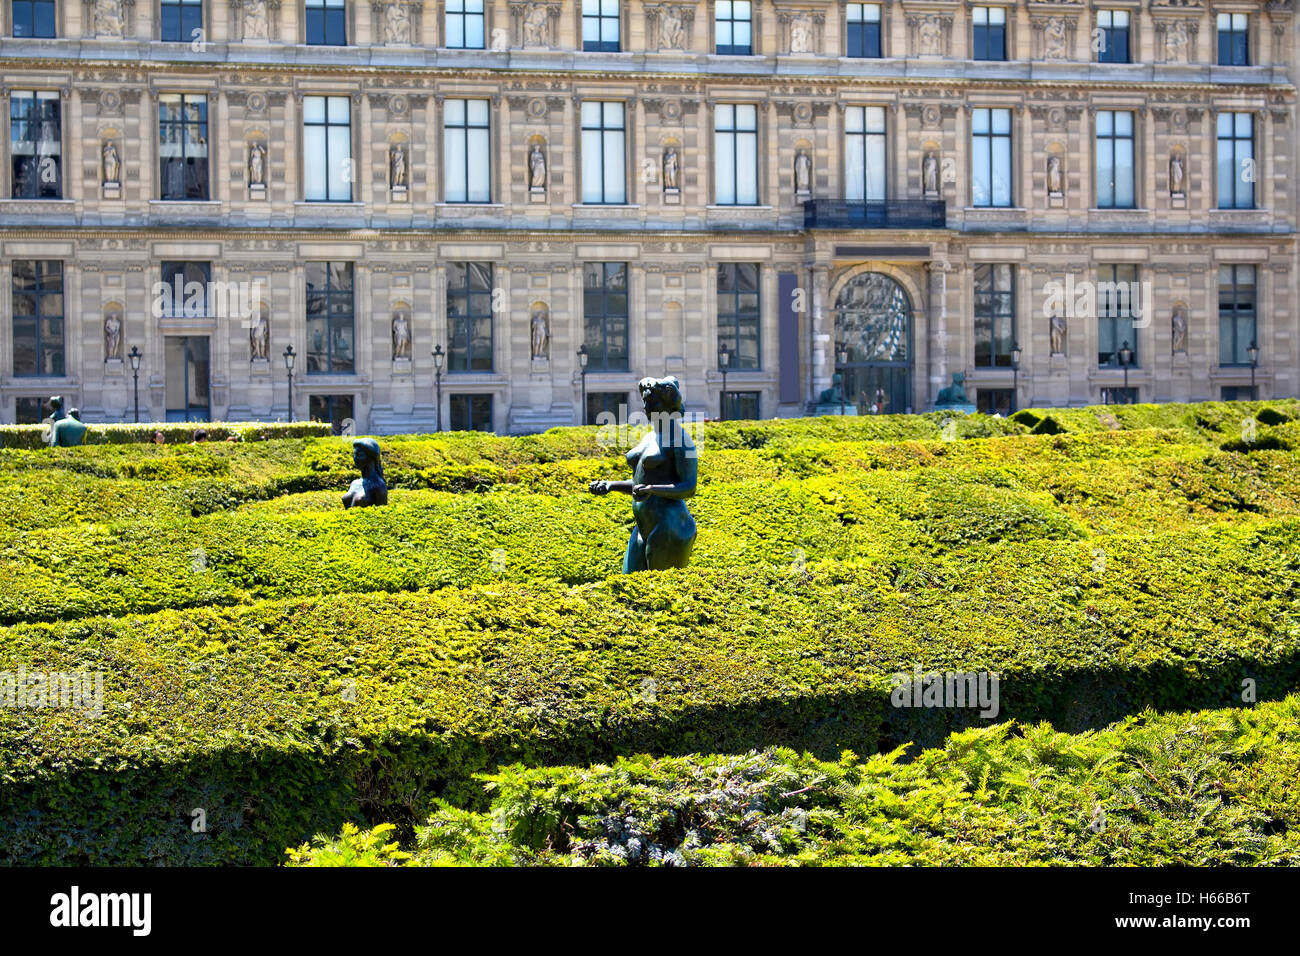 Expansive, 17th-century formal garden dotted with statues, including 18 bronzes by Maillol at Jardin Des Tuileries in Paris Stock Photo